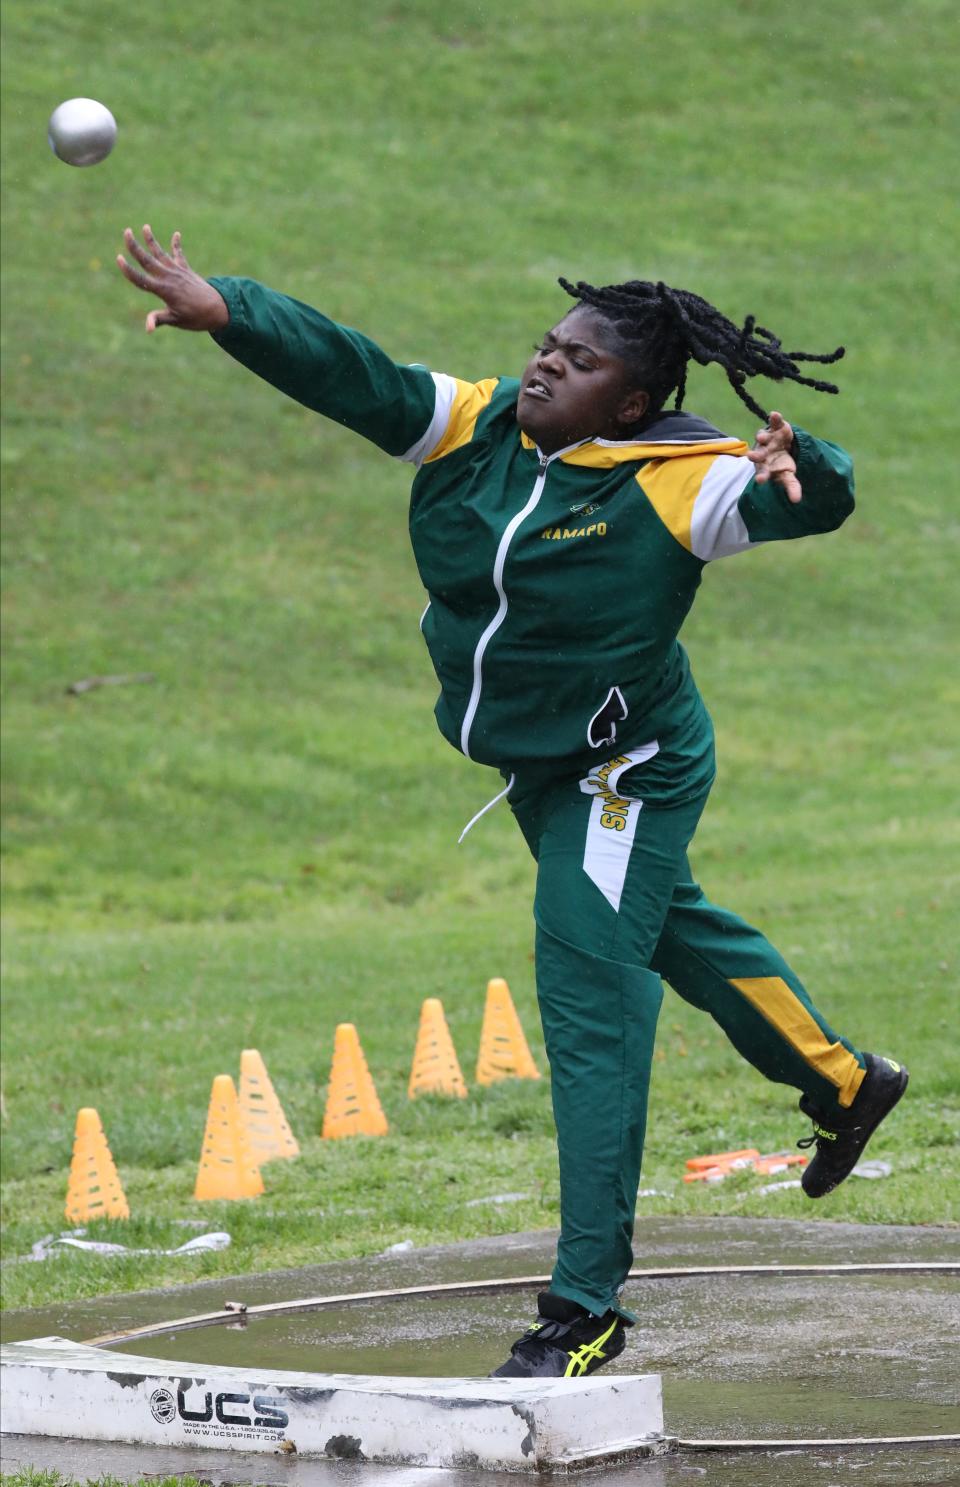 Ramapo's Ashlee Lupin lets the shot put fly Athletes during the Gold Rush Invitational Track & Field meet at Clarkstown South High School in West Nyack, April 29, 2023. She finished seventh out of 21 girls varsity throwers in the event.